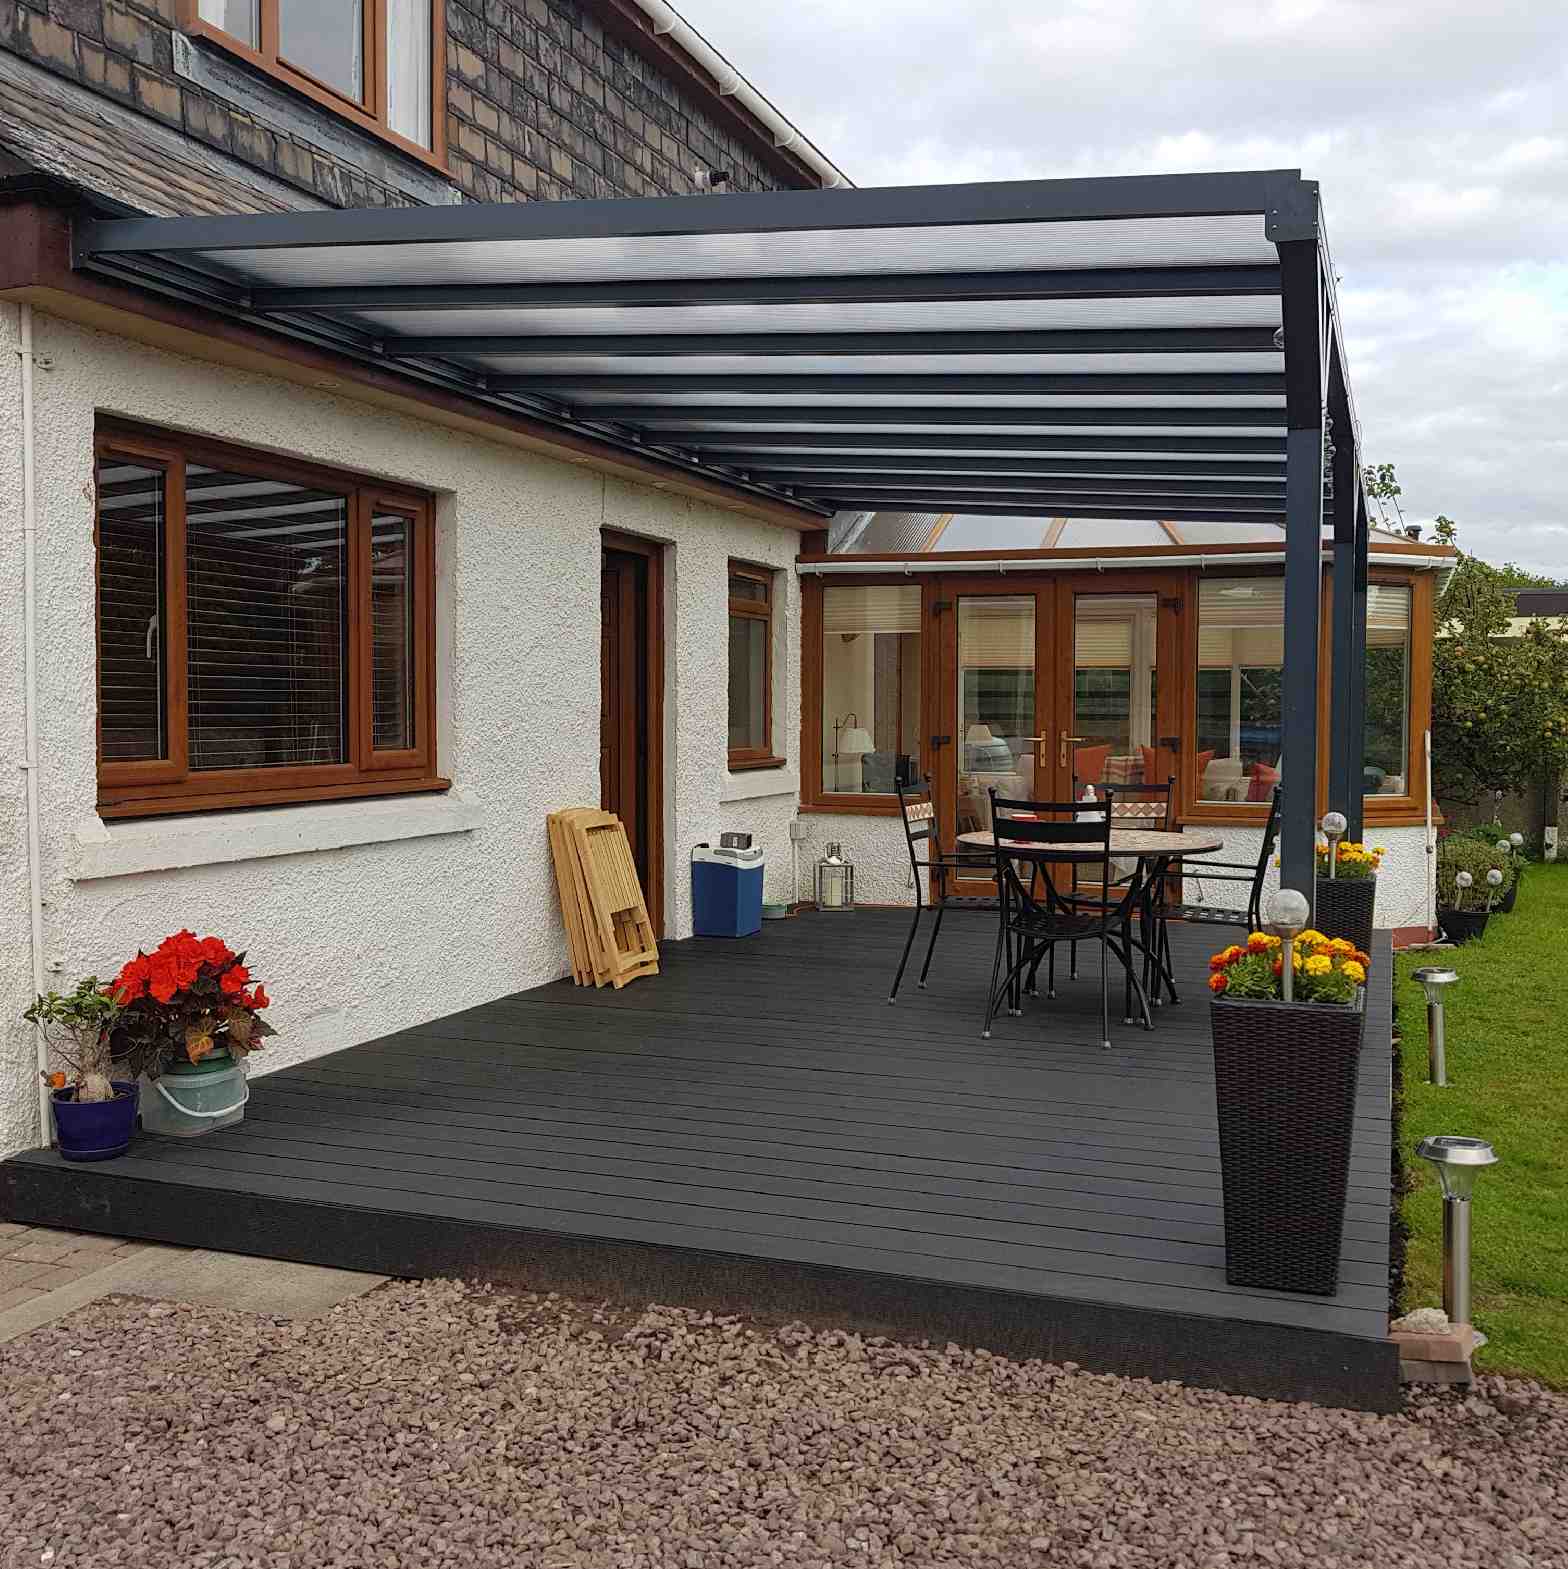 Buy Omega Verandah, Anthracite Grey, 16mm Polycarbonate Glazing - 2.1m (W) x 4.0m (P), (2) Supporting Posts online today